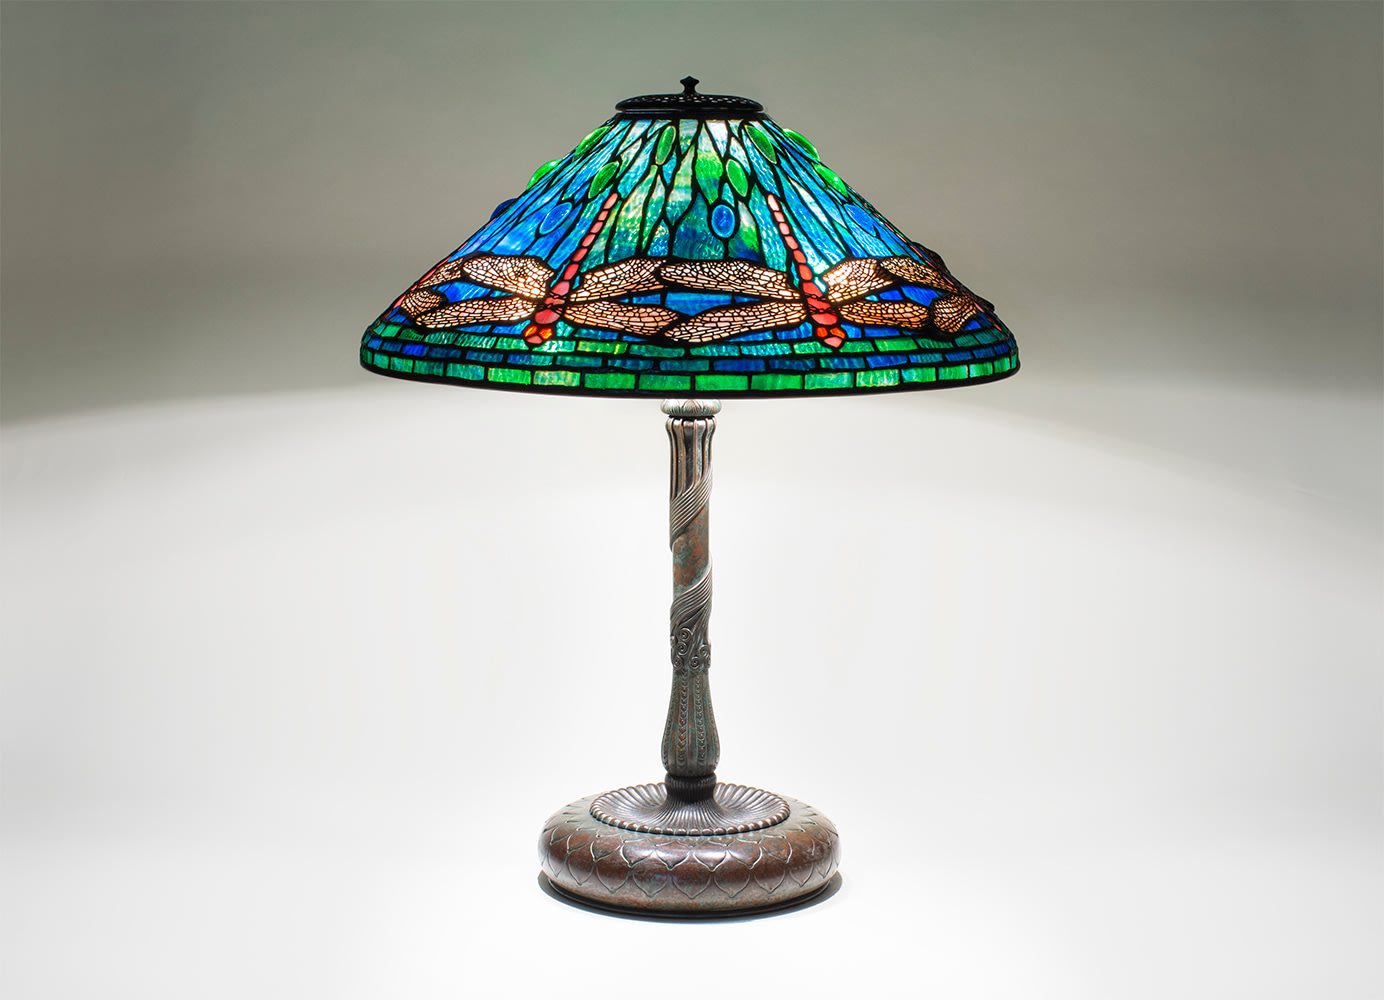 a bronze and leaded glass tiffany lamp dating from 1906, depicting pink and red dragonflies with pierced filigree wings floating above a background of translucent rippled glass in shades of blue representing water